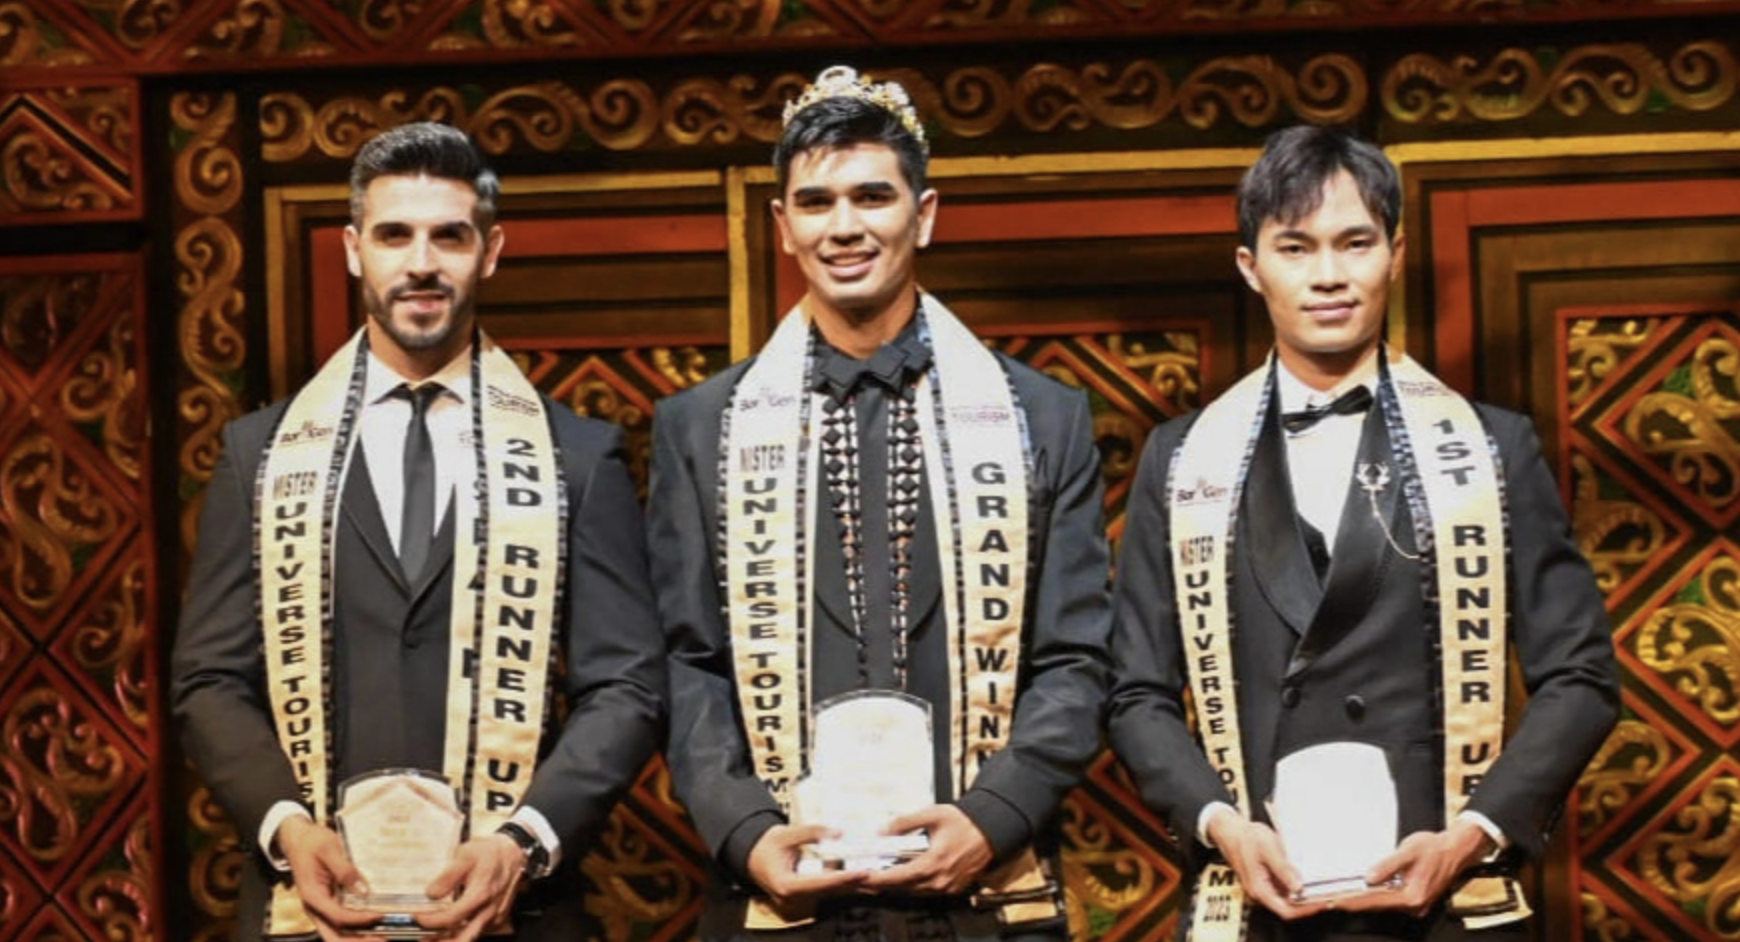 Huynh Vo Hoang Son (R) named the first runner-up at the Mister Universe Tourism in 2023. Photo: Supplied